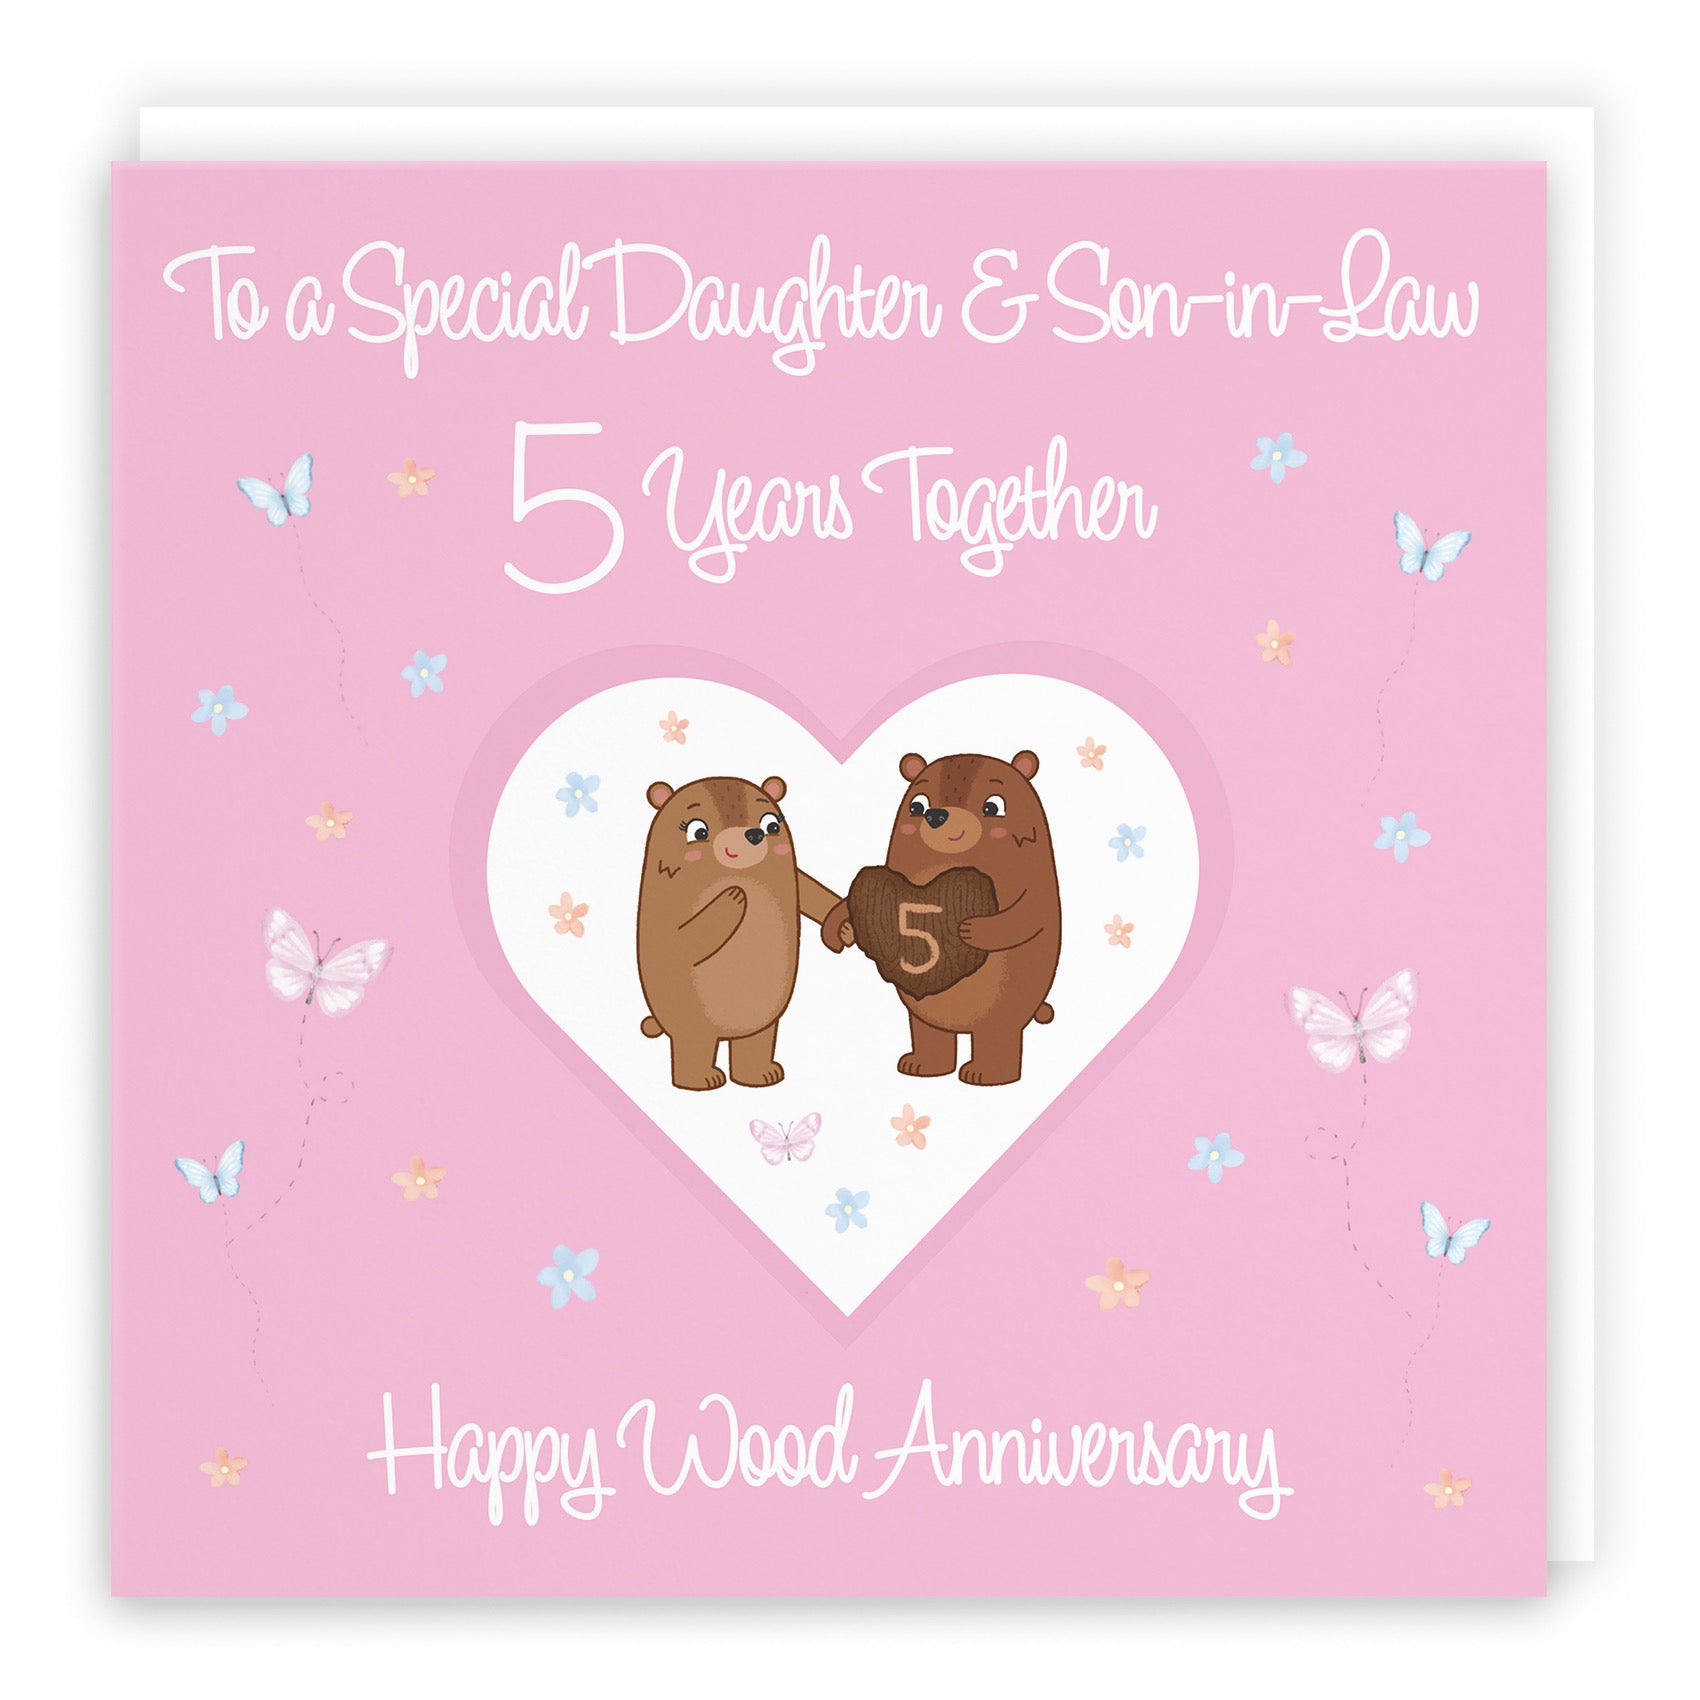 Large Daughter & Son-in-Law 5th Anniversary Card Romantic Meadows - Default Title (B0CXY5FYKR)